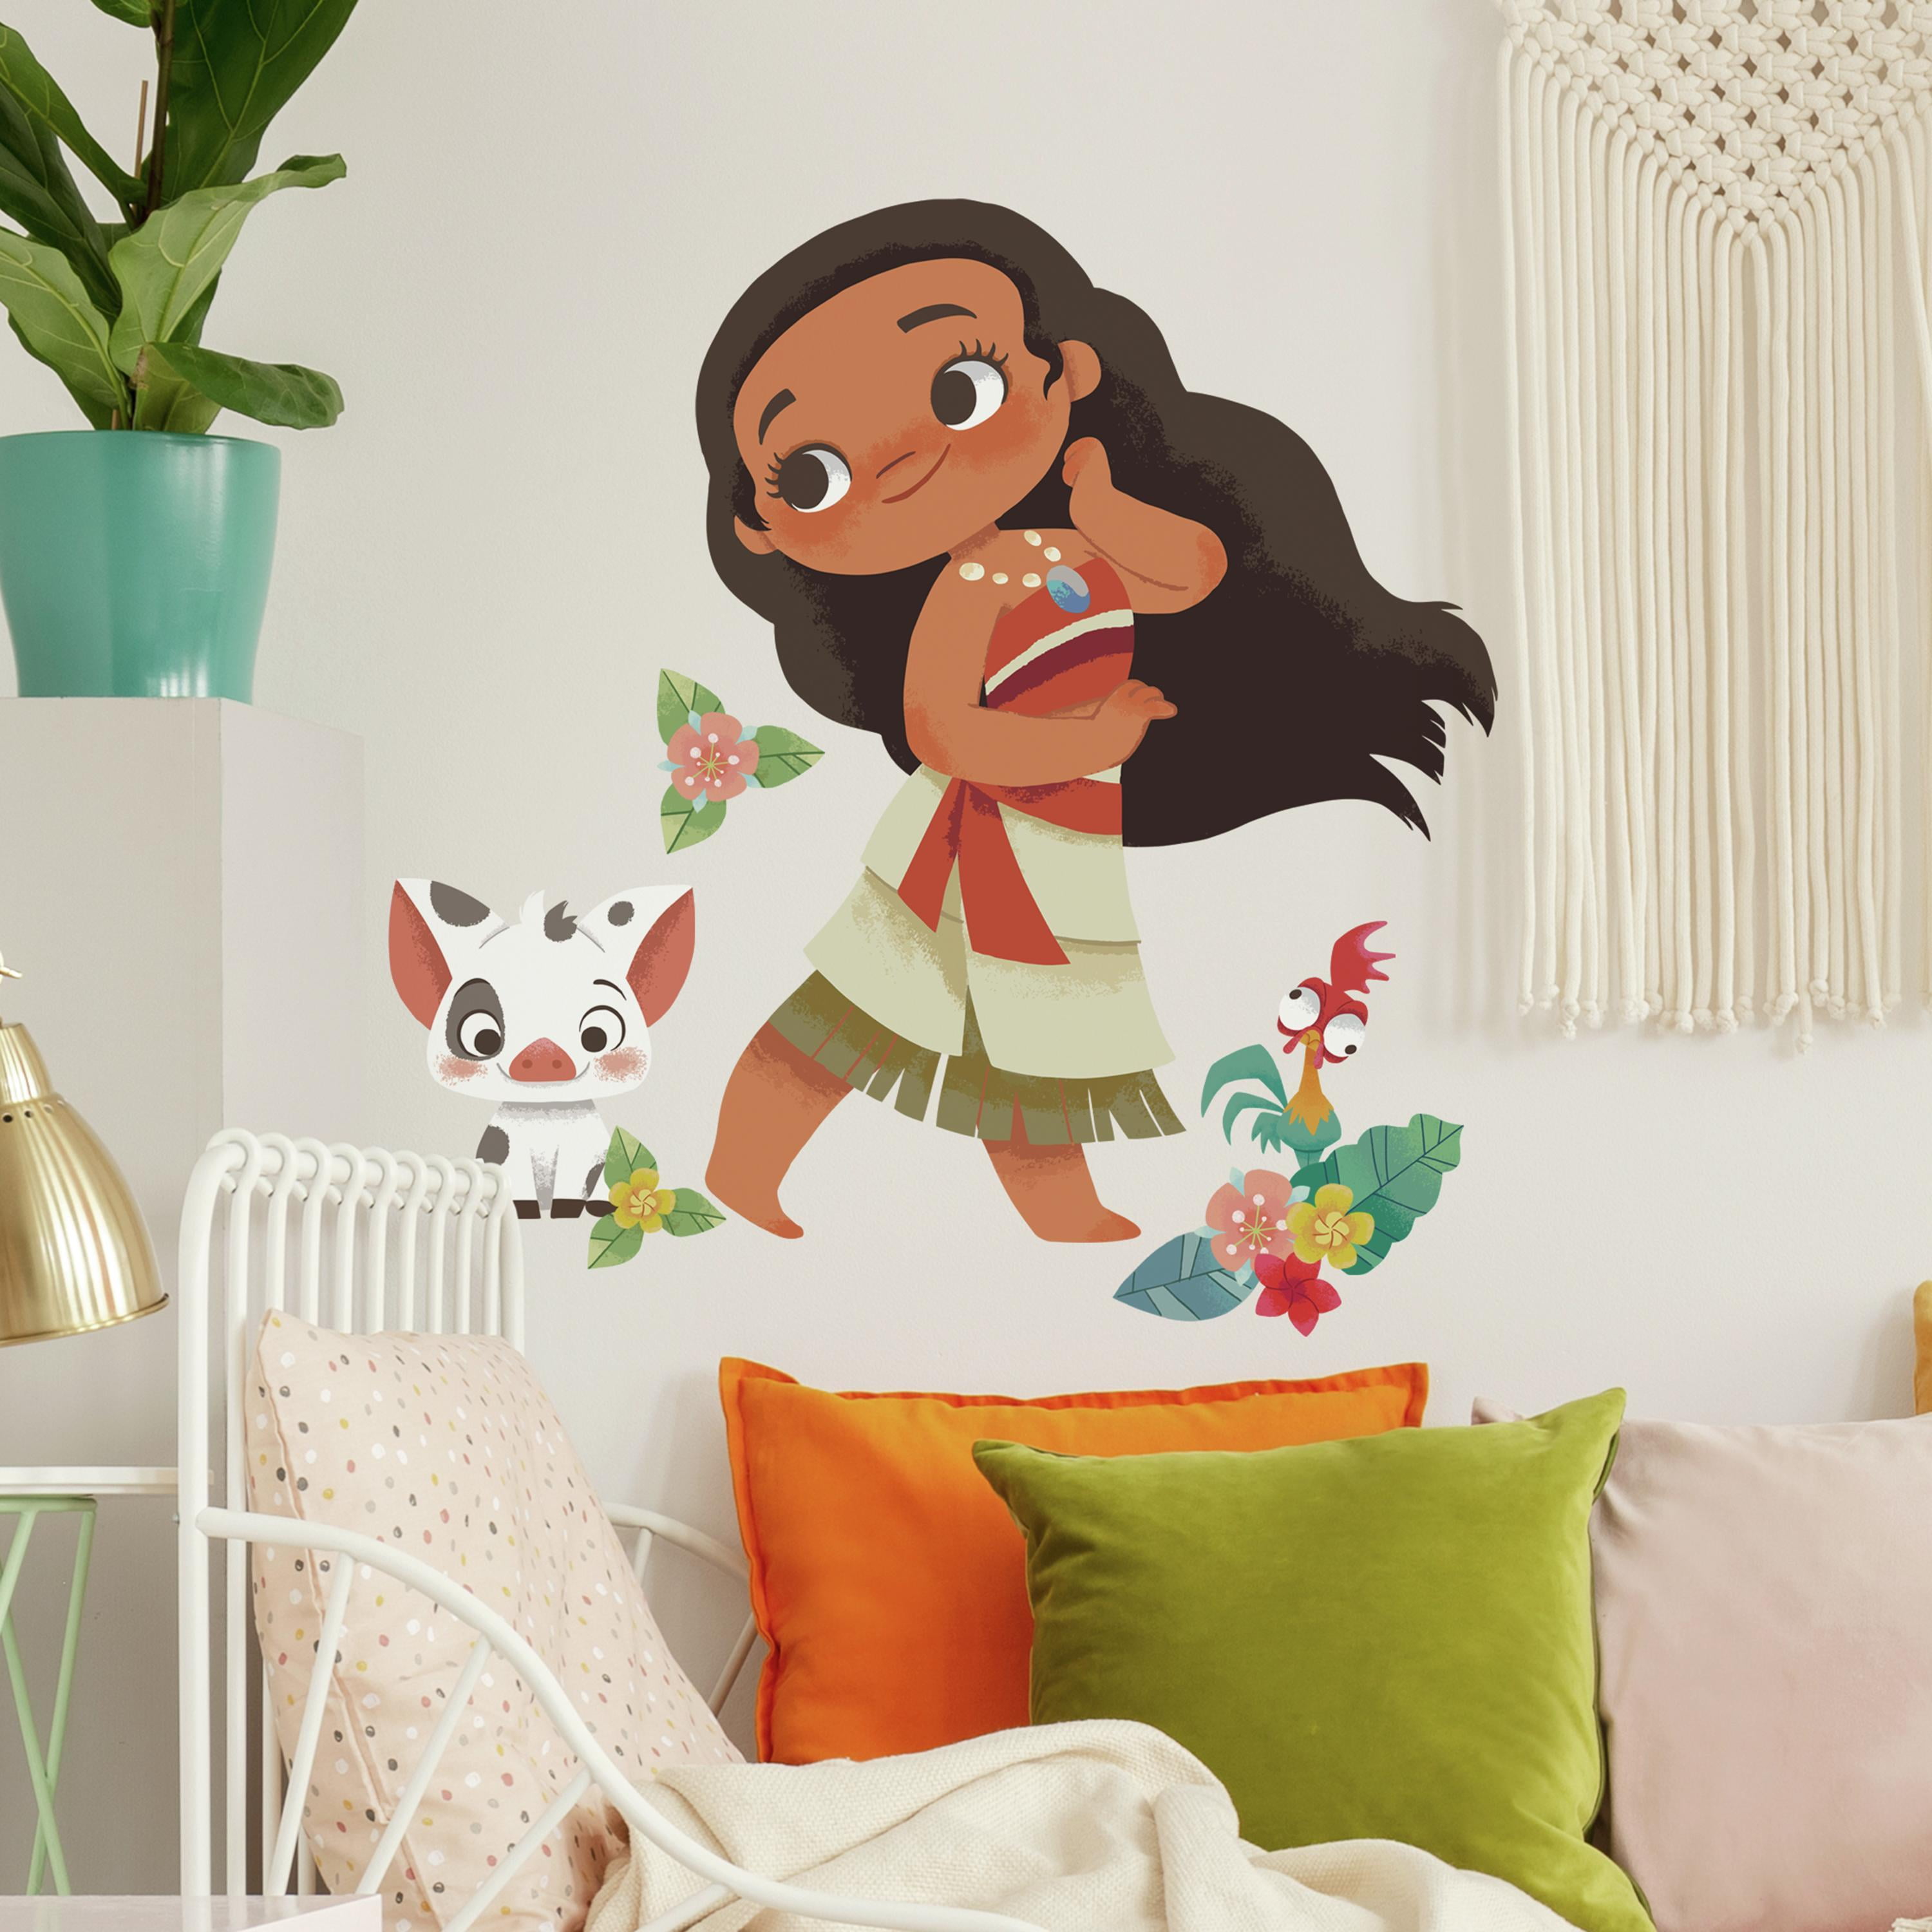 Details about  / New GIANT MOANA WALL Stickers Disney Girls BedRoom Decor Decals Mural Pua Maui